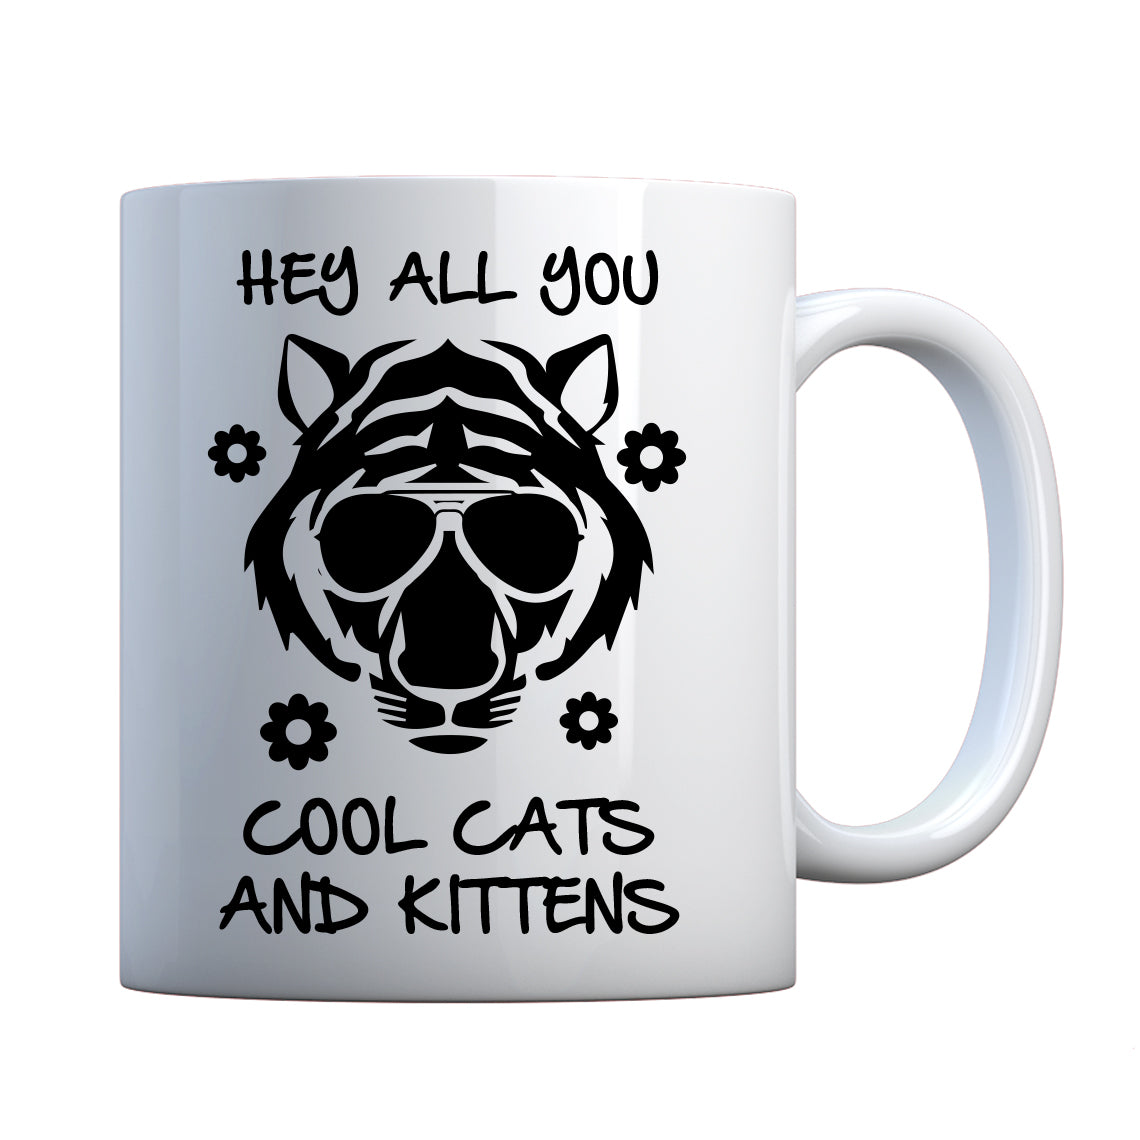 Hey all you Cool Cats and Kittens Ceramic Gift Mug